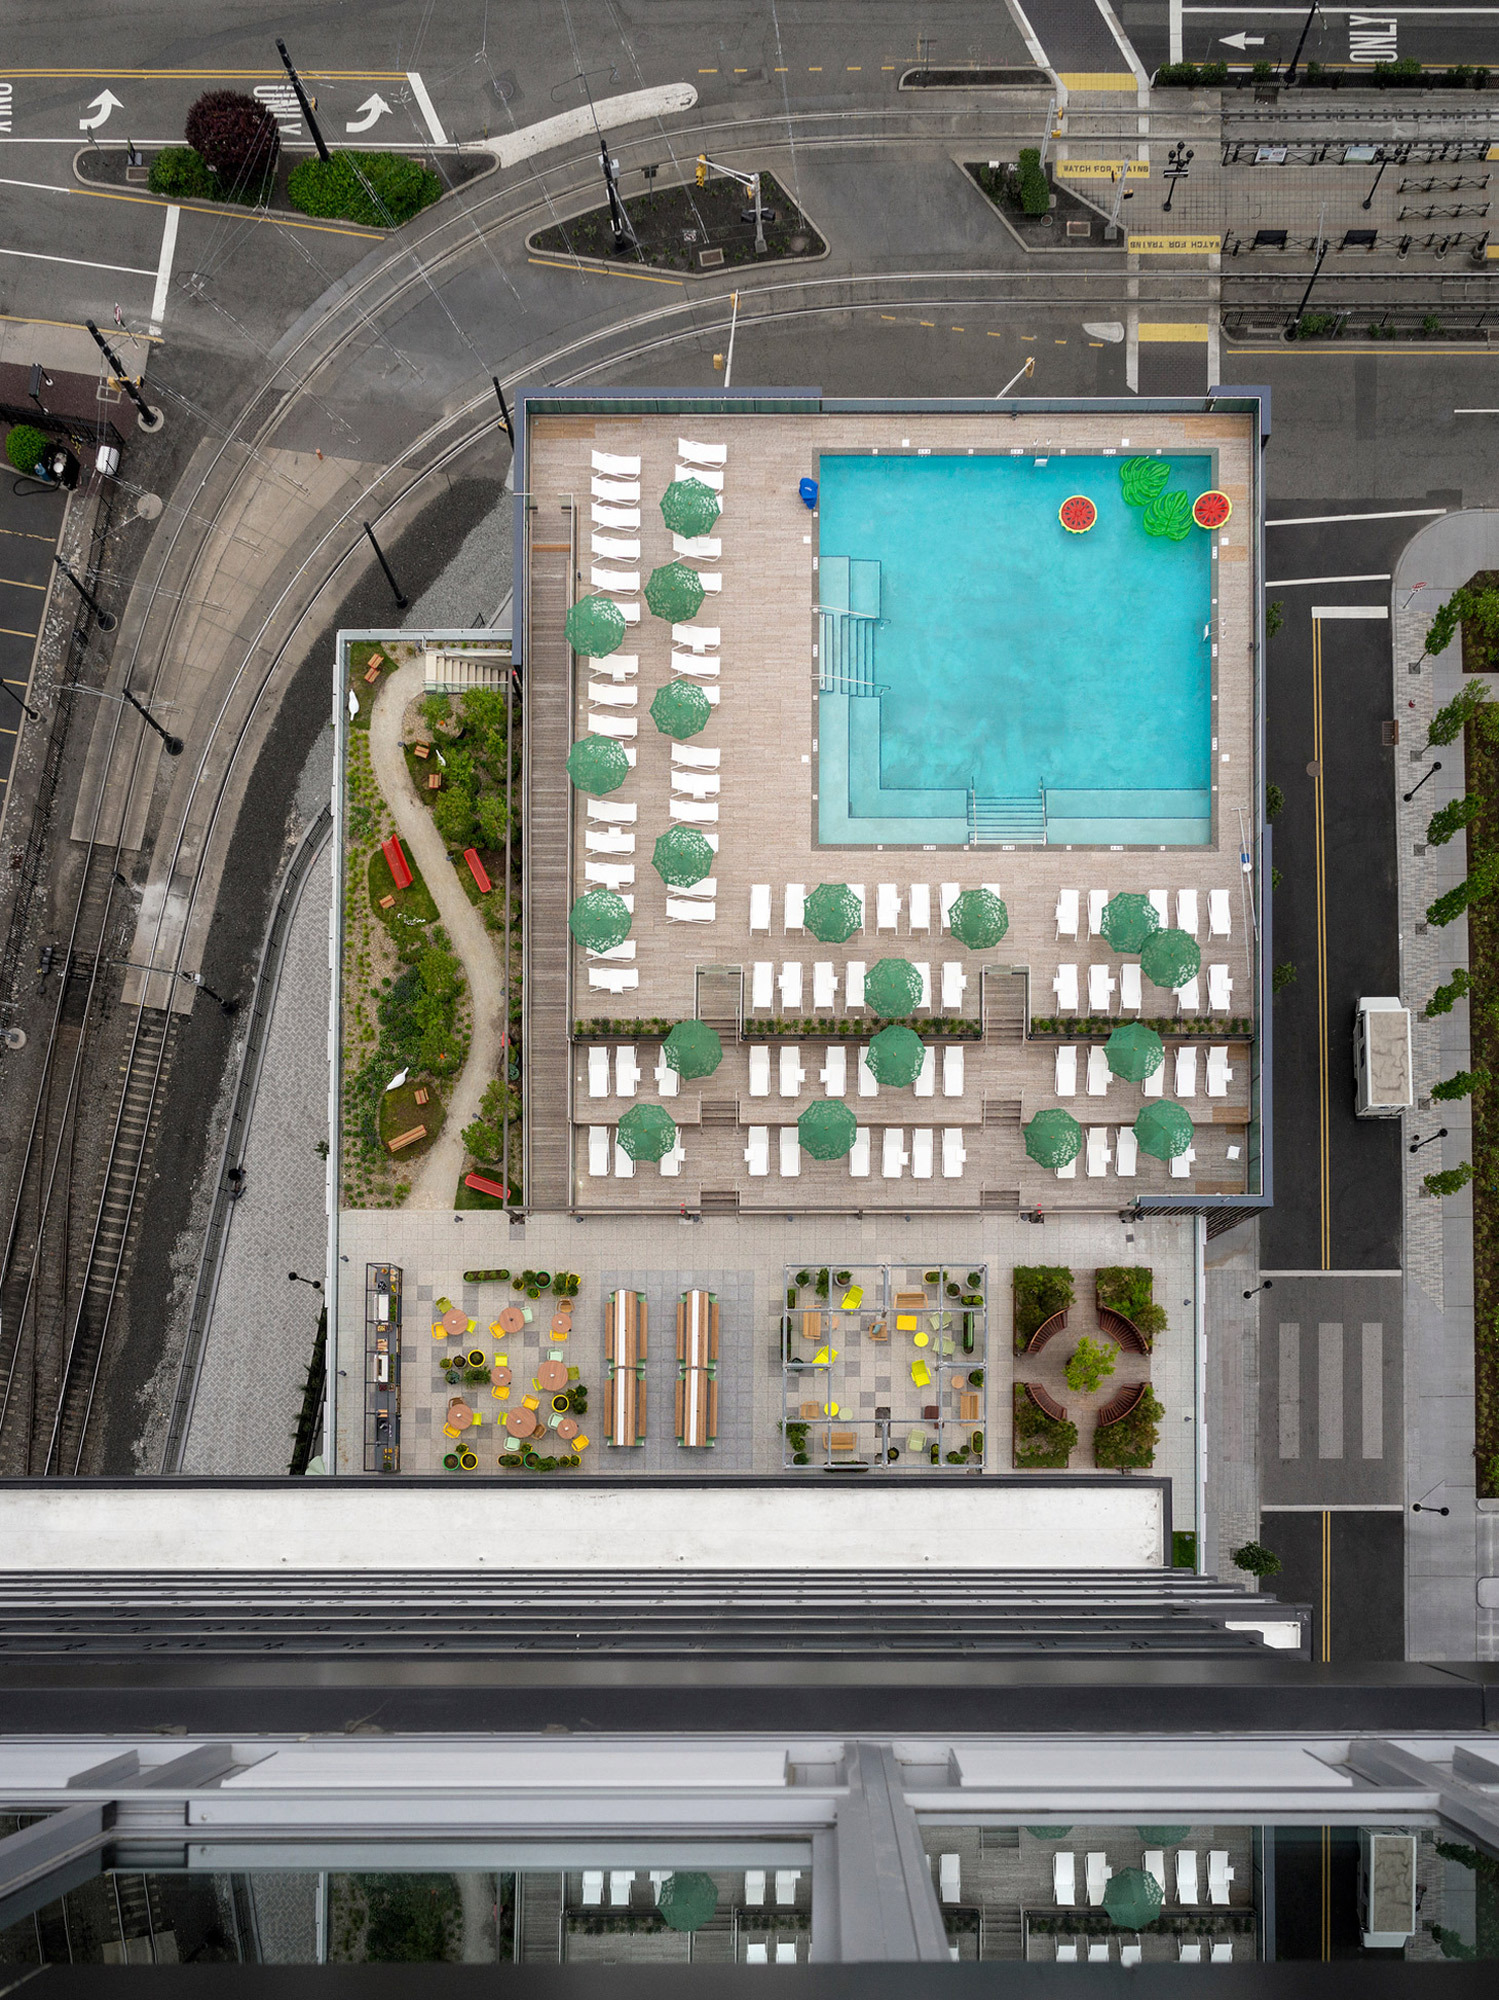 Bird's-eye view captures a rooftop pool with geometric lounging areas, surrounded by a perimeter garden. The juxtaposition of the aquatic blue against the urban grays highlights a well-planned oasis amidst the city's structured lines.